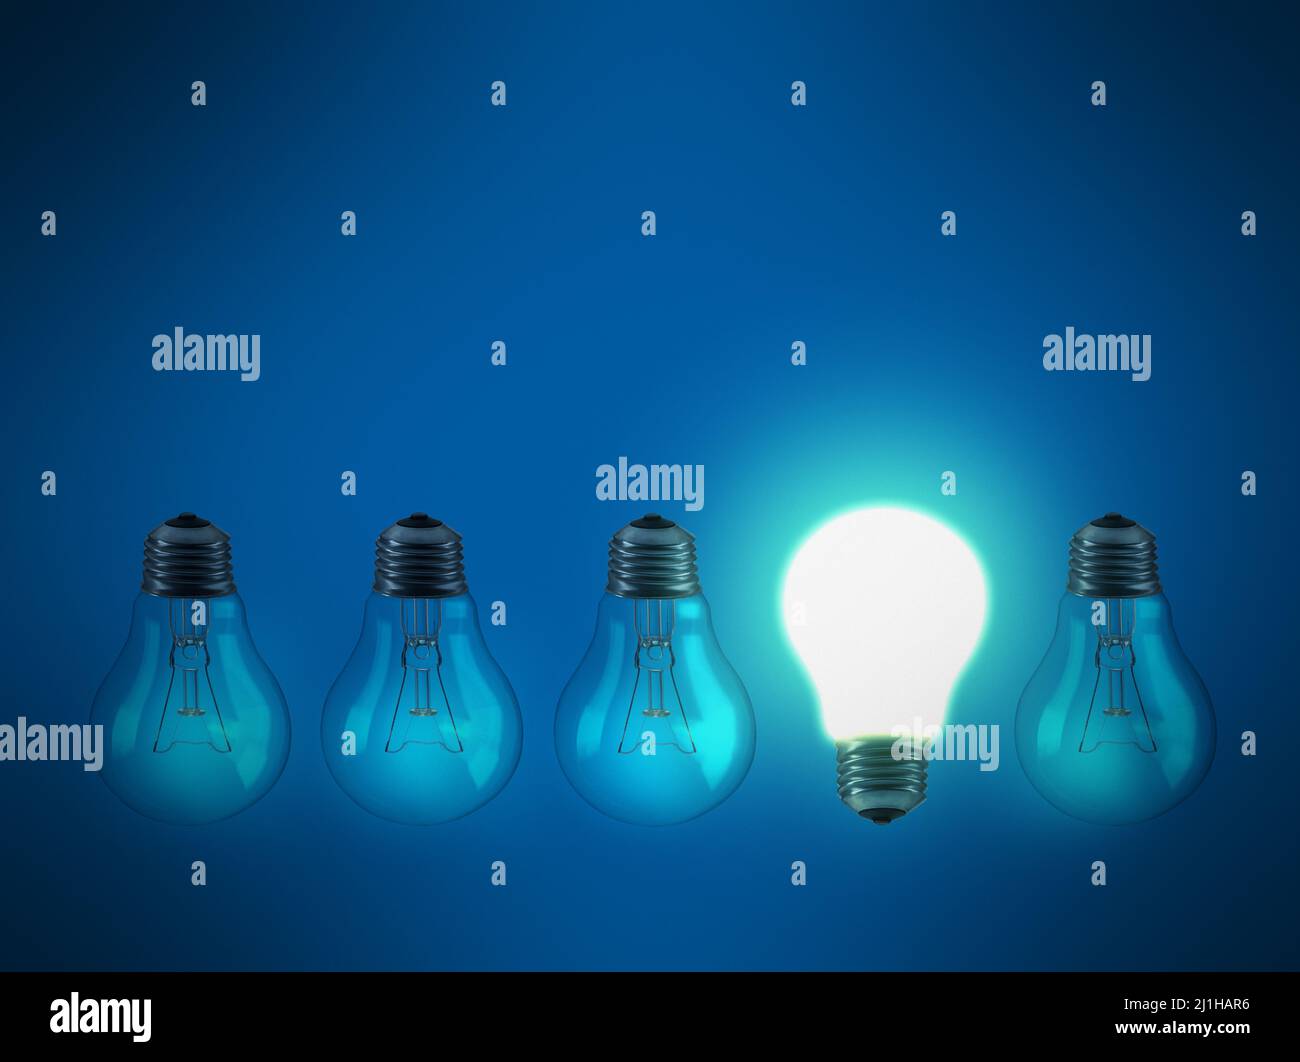 Stand out from the crowd. Studio shot of a row of lightbulbs against a blue background. Stock Photo